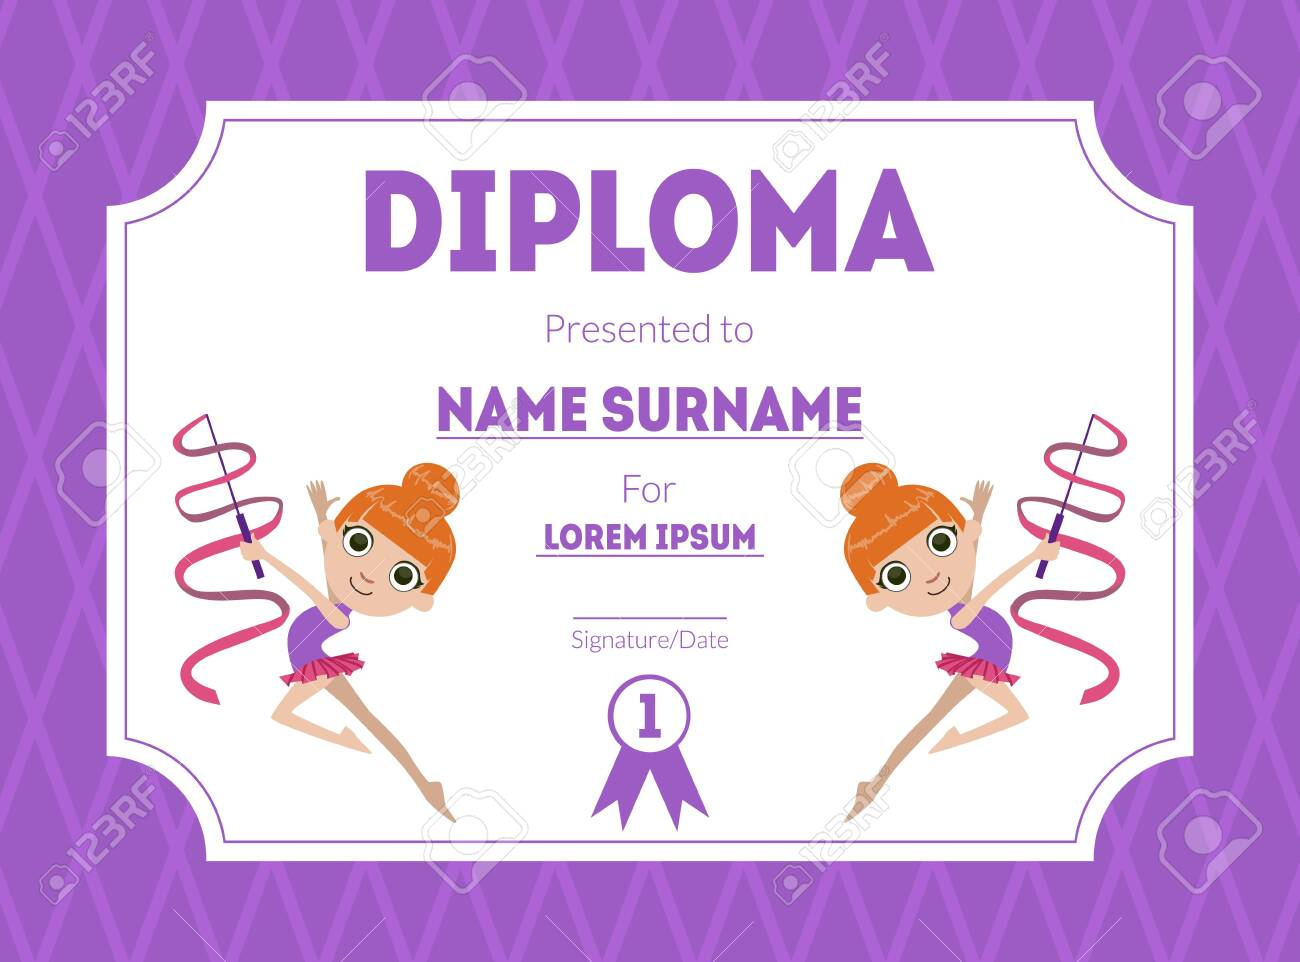 Sports Award Diploma Template, Kids Certificate With Gymnast Girl  Intended For Gymnastics Certificate Template